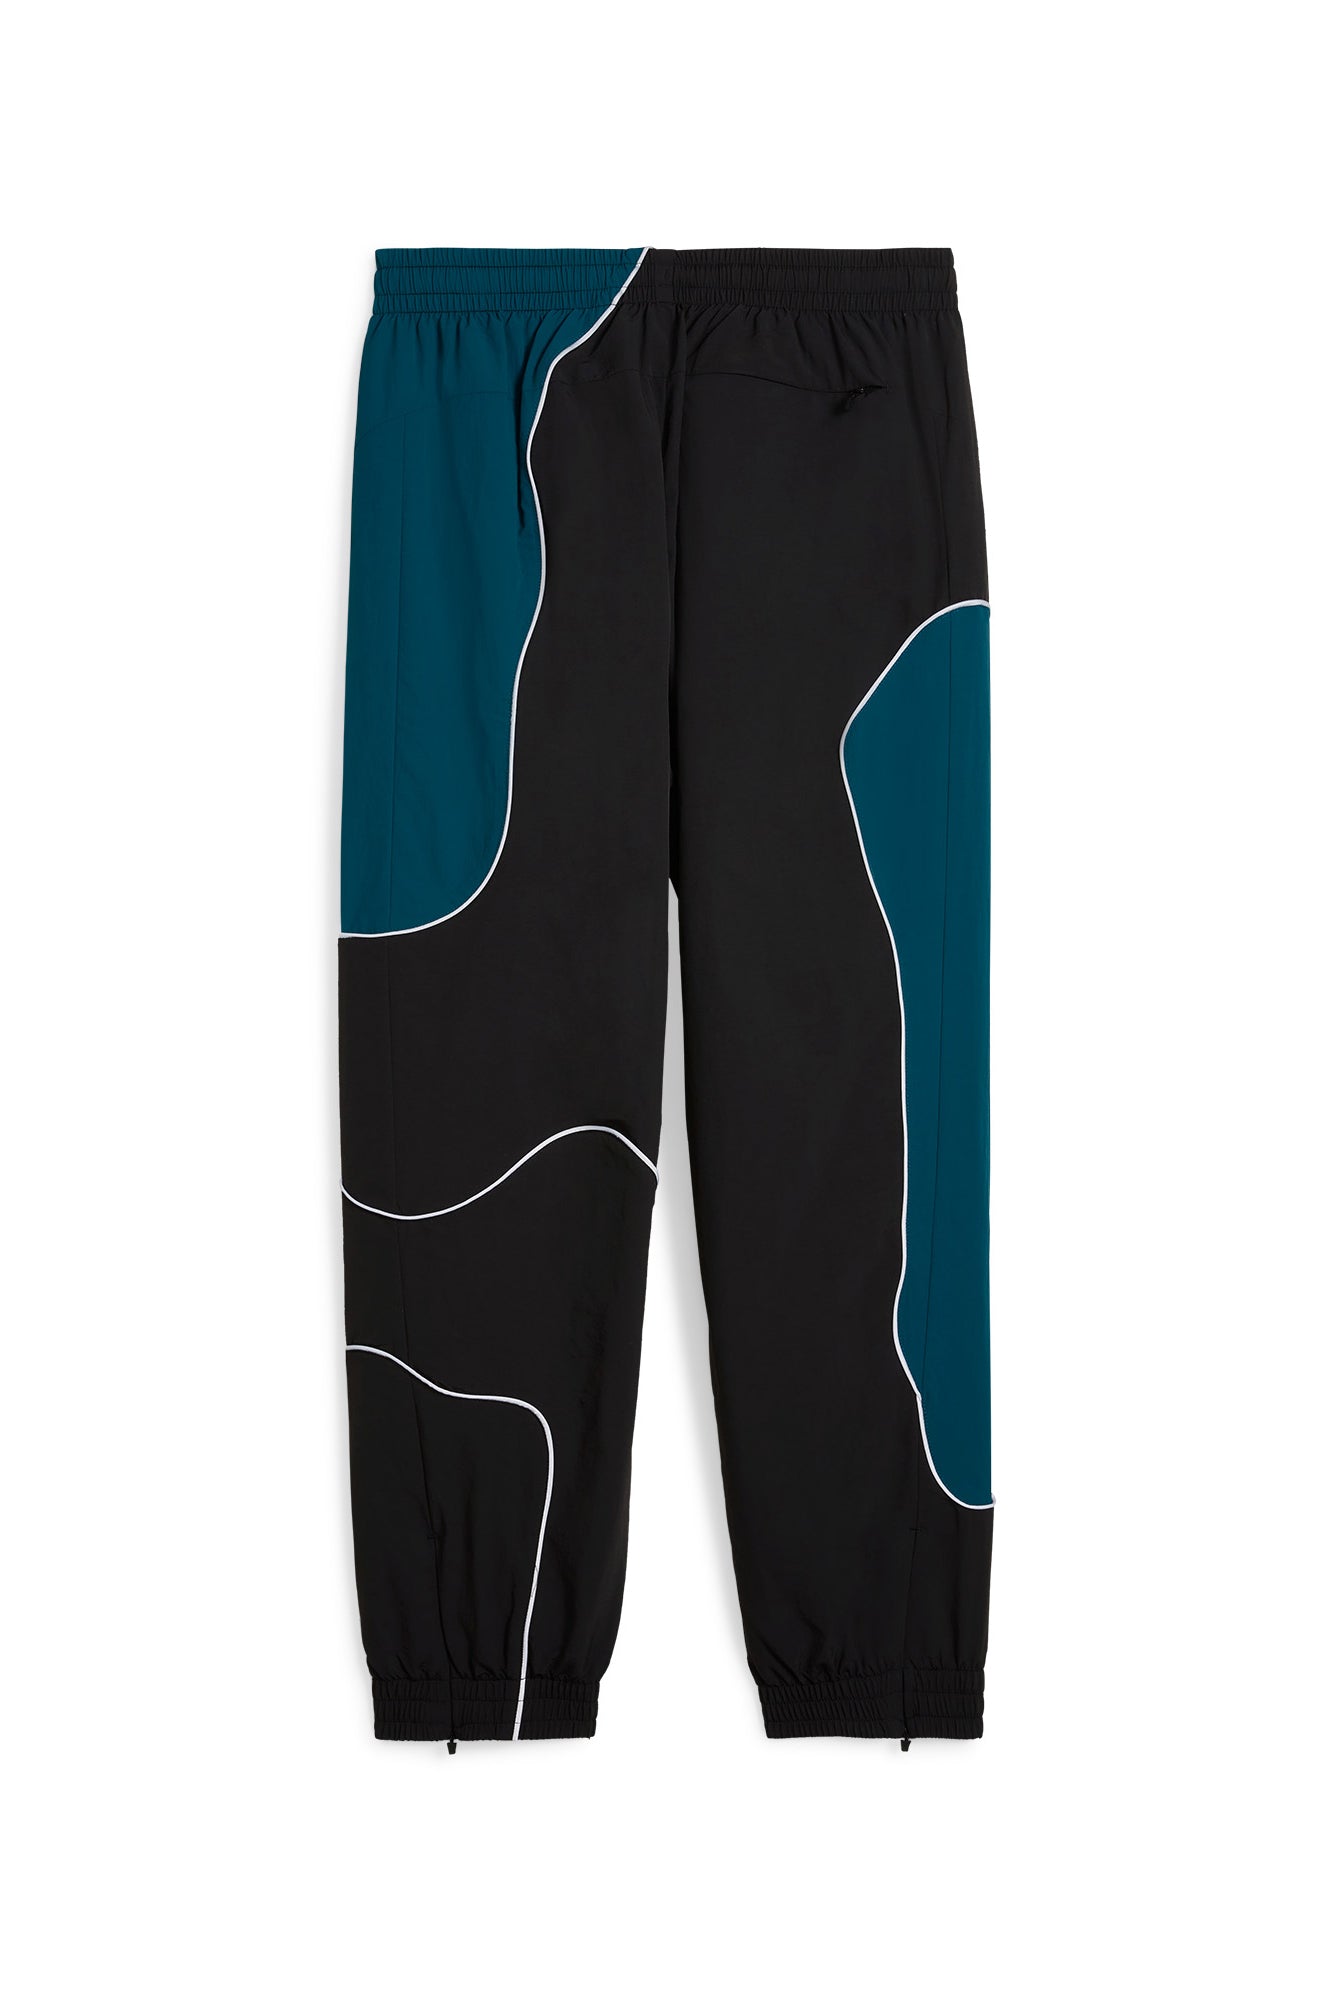 The PUMA X P.A.M. CELLERATOR TRACK PANTS  available online with global shipping, and in PAM Stores Melbourne and Sydney.